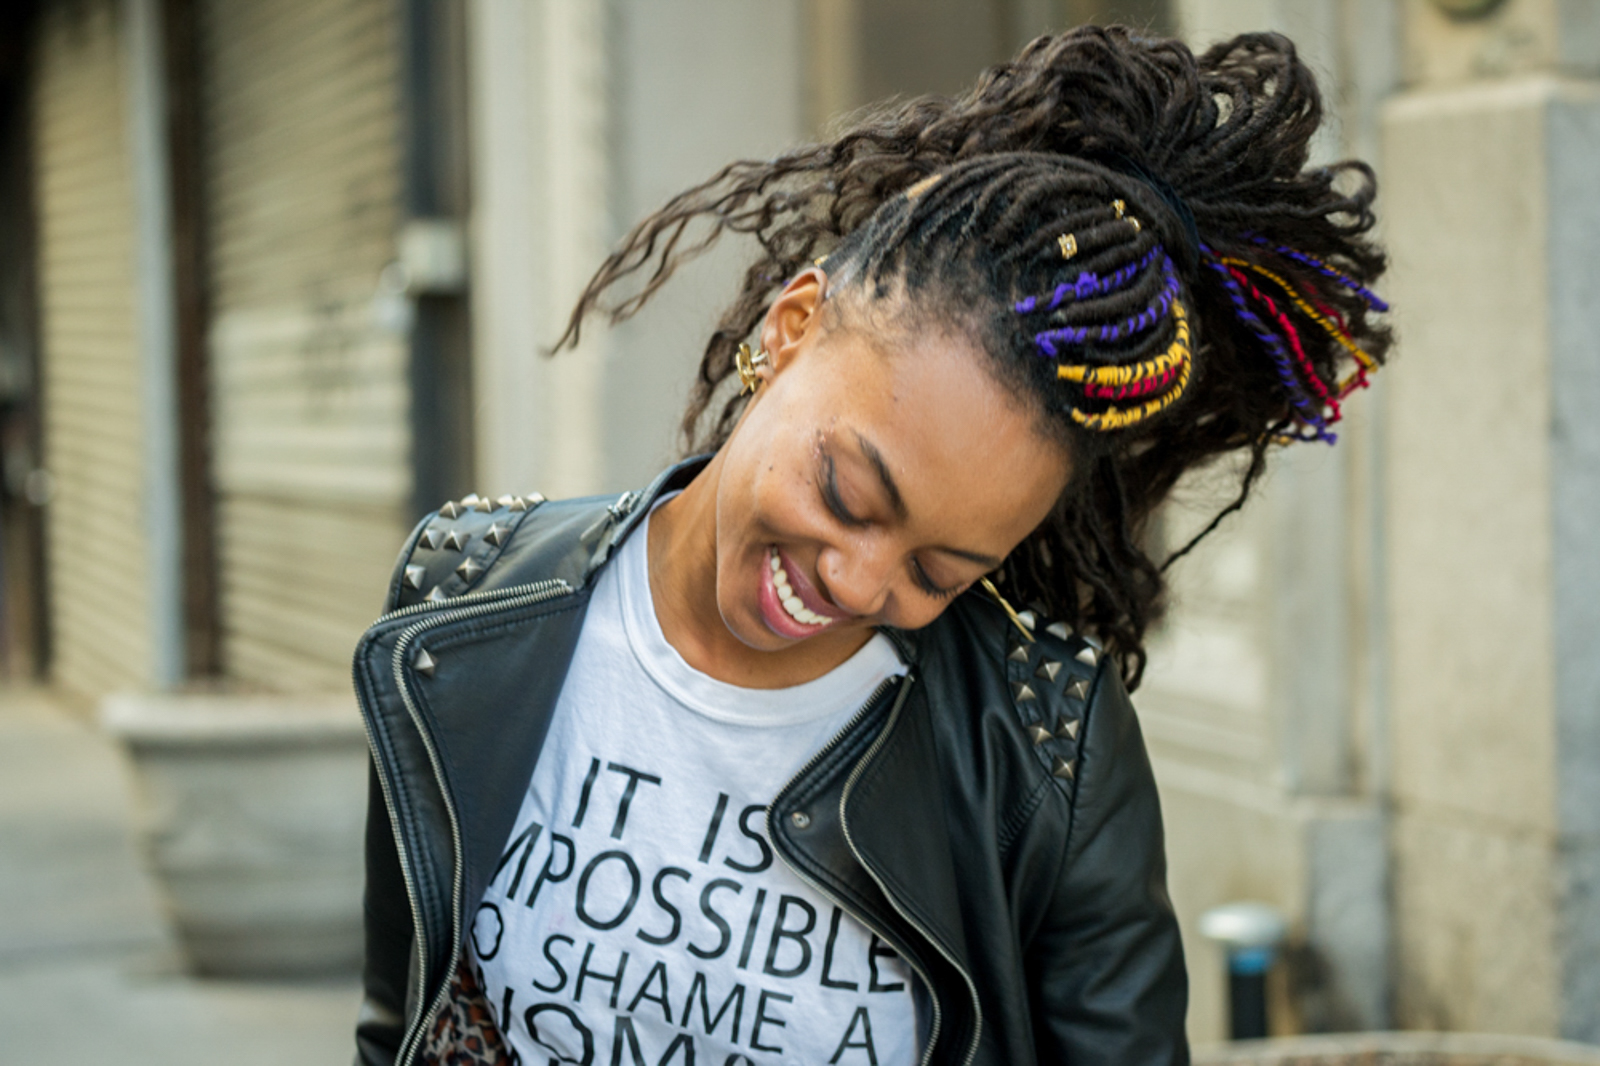 Portrait of woman with dreadlocks and leather jacket smiling in motion